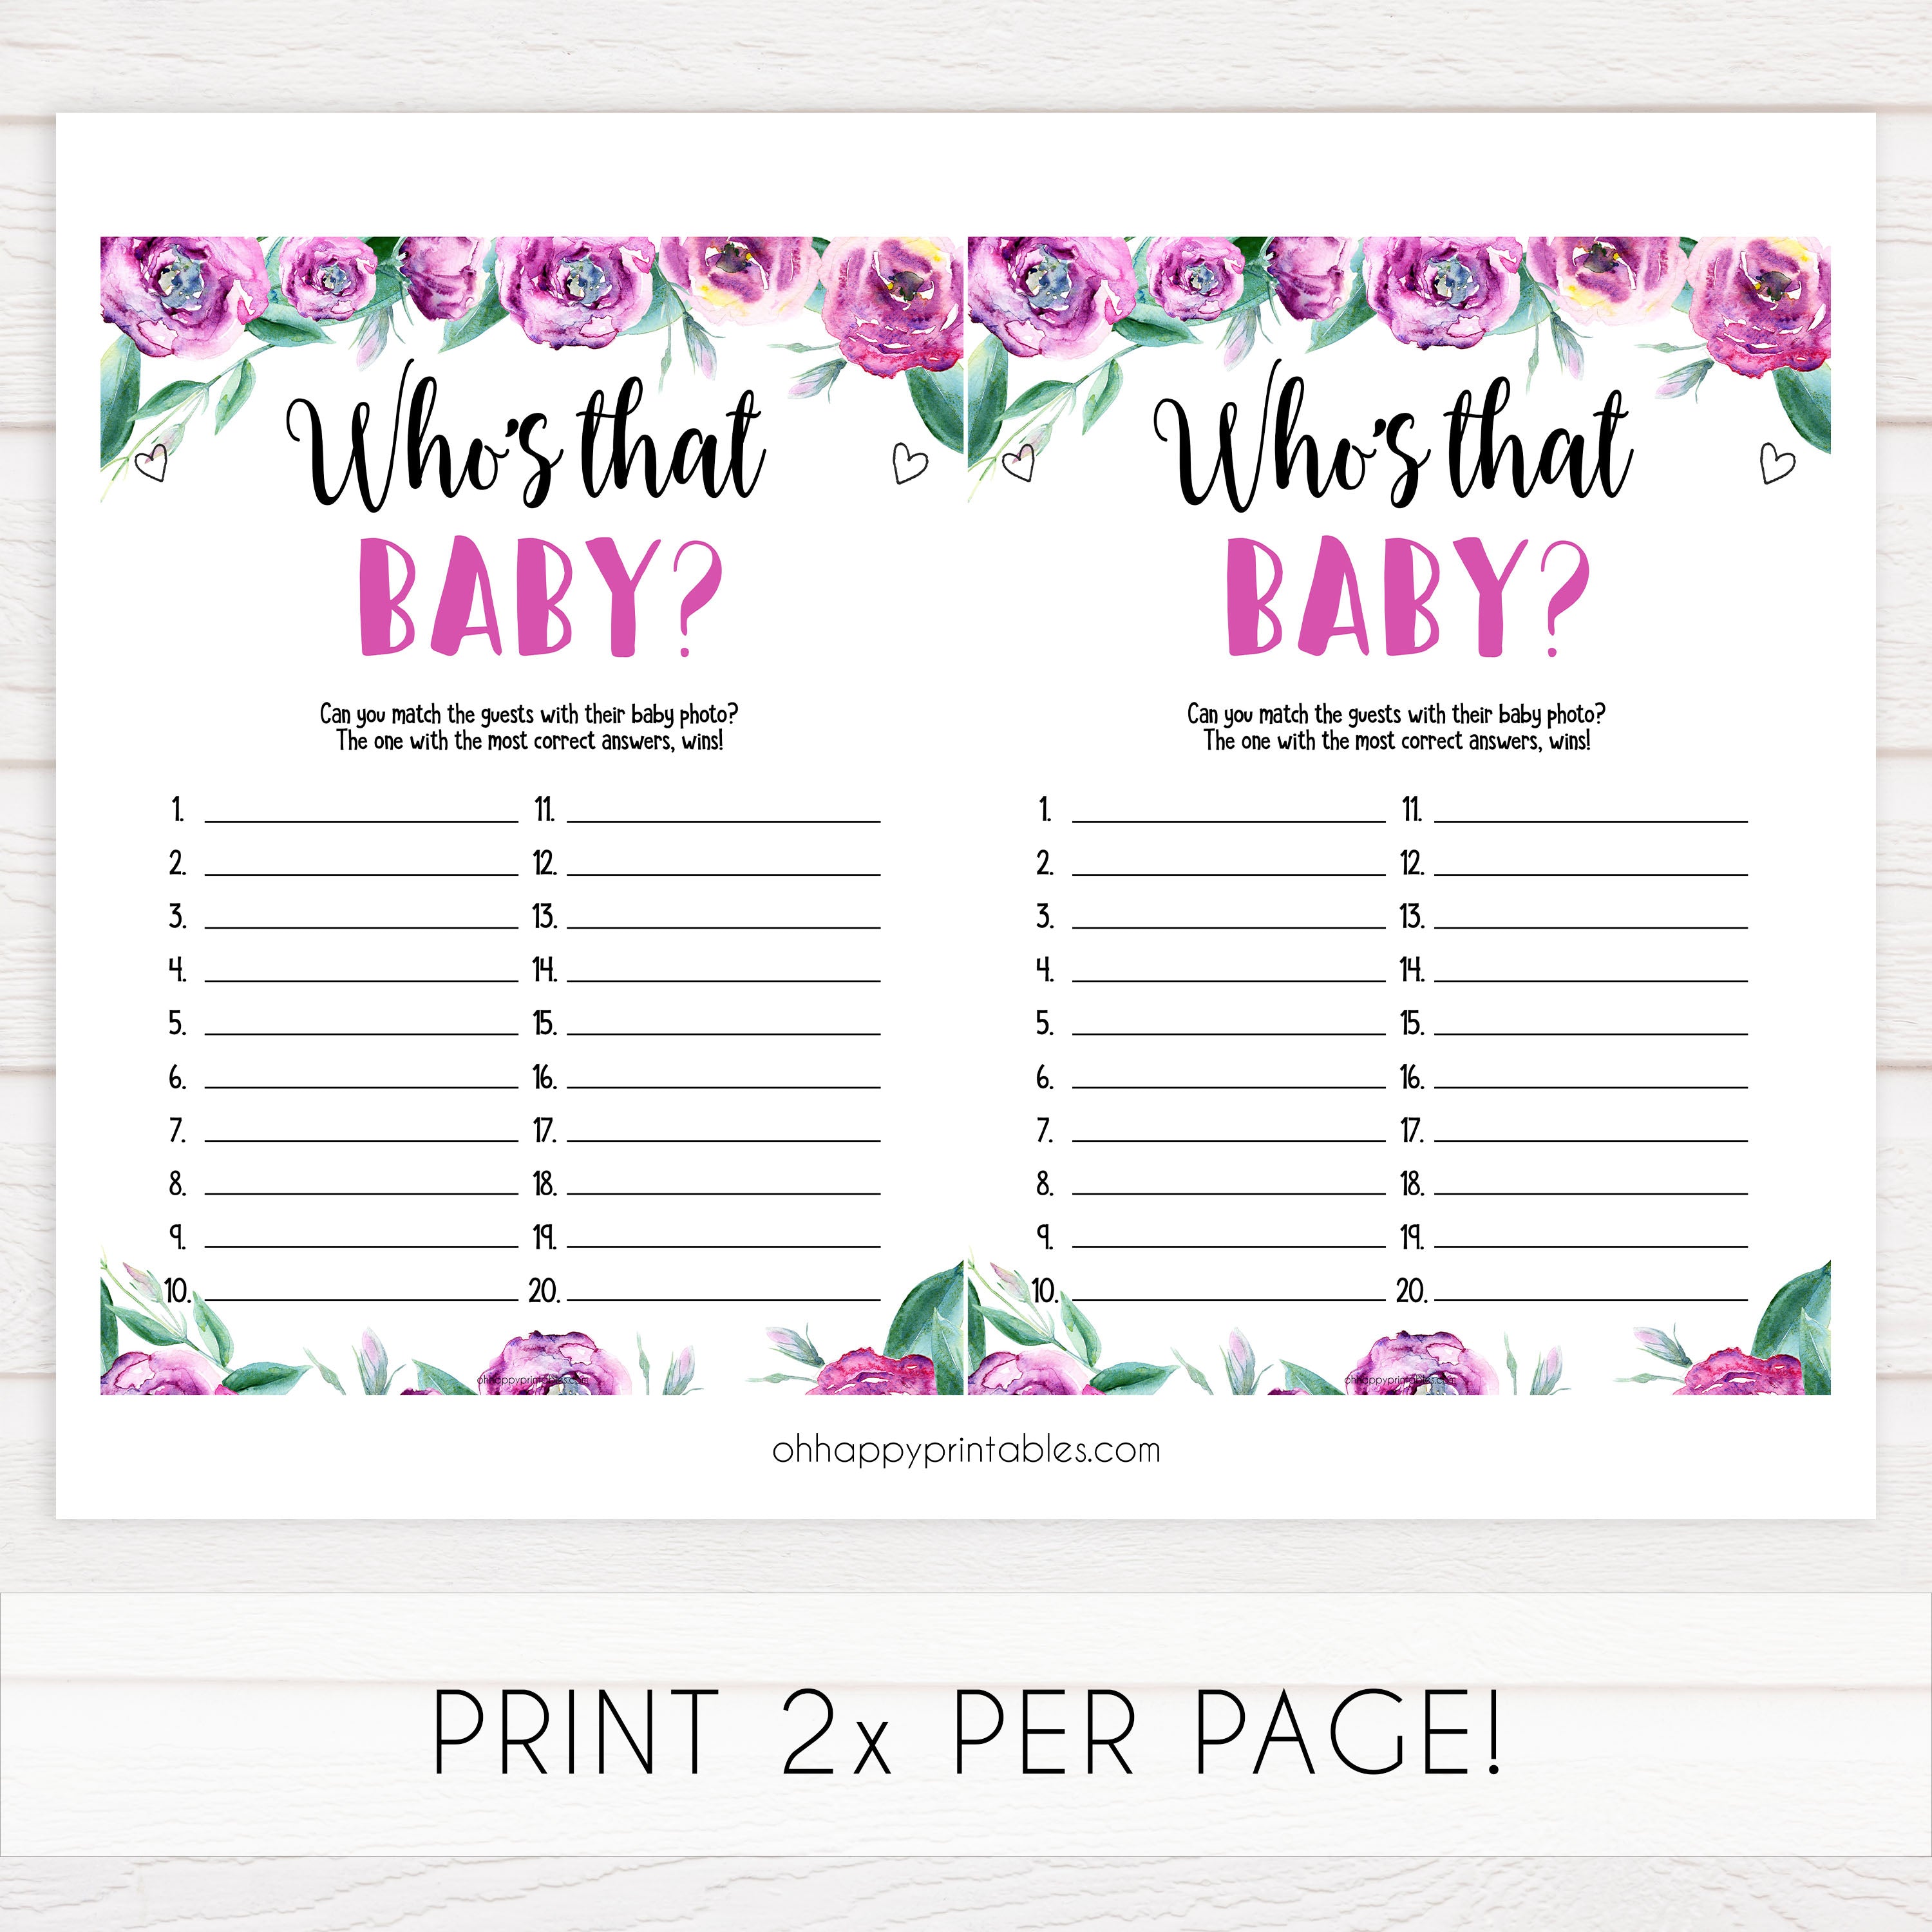 whos that baby photo game, printable baby shower games, fun baby shower games, purple baby shower ideas